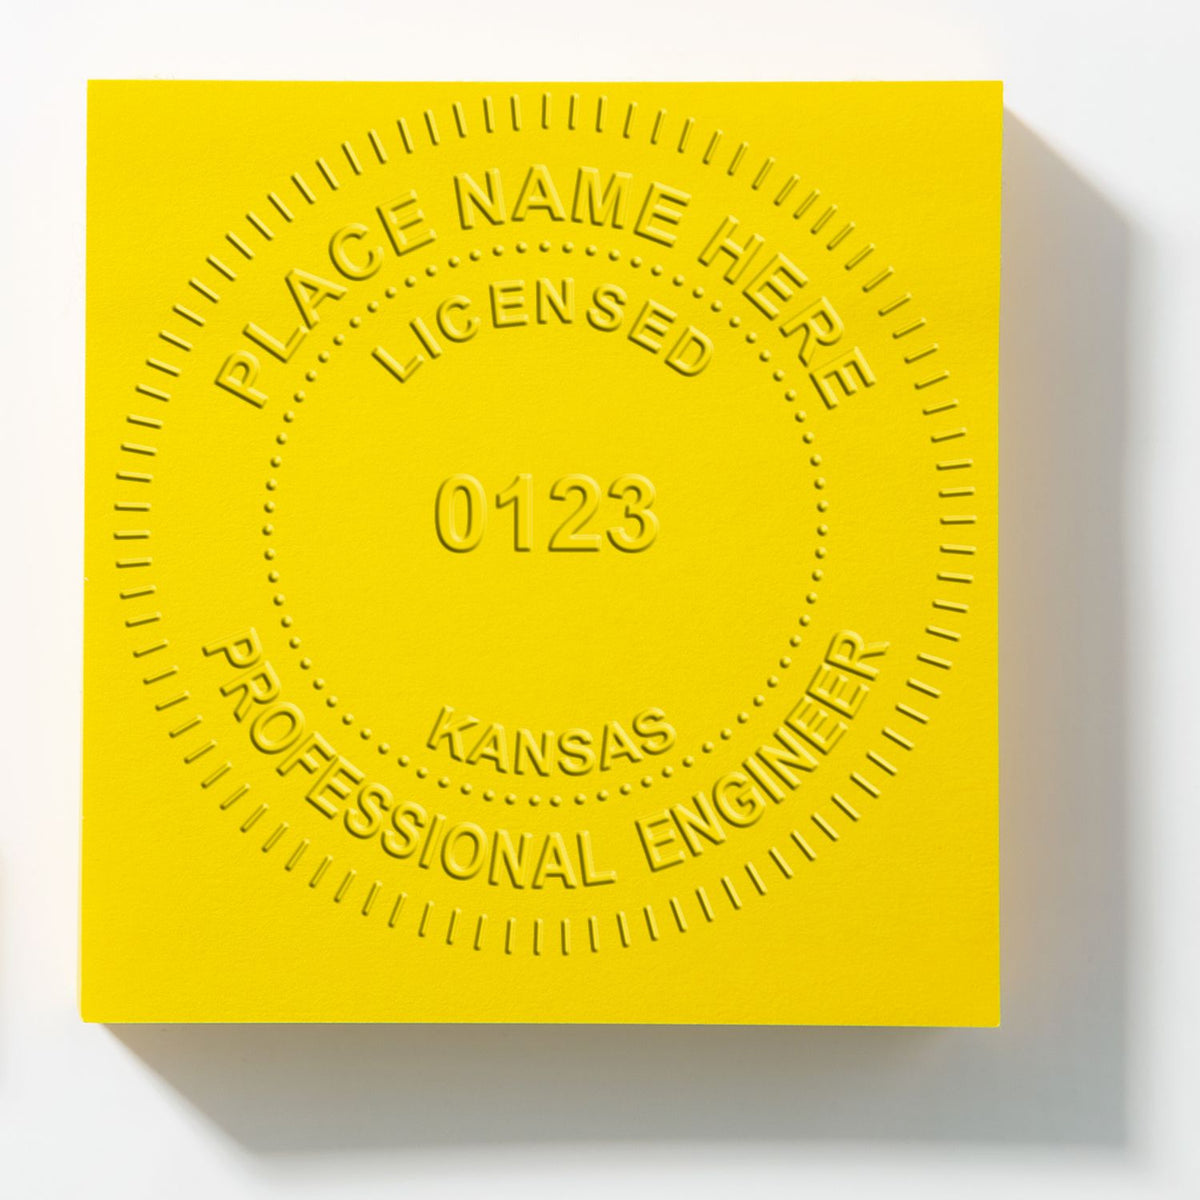 An alternative view of the Long Reach Kansas PE Seal stamped on a sheet of paper showing the image in use